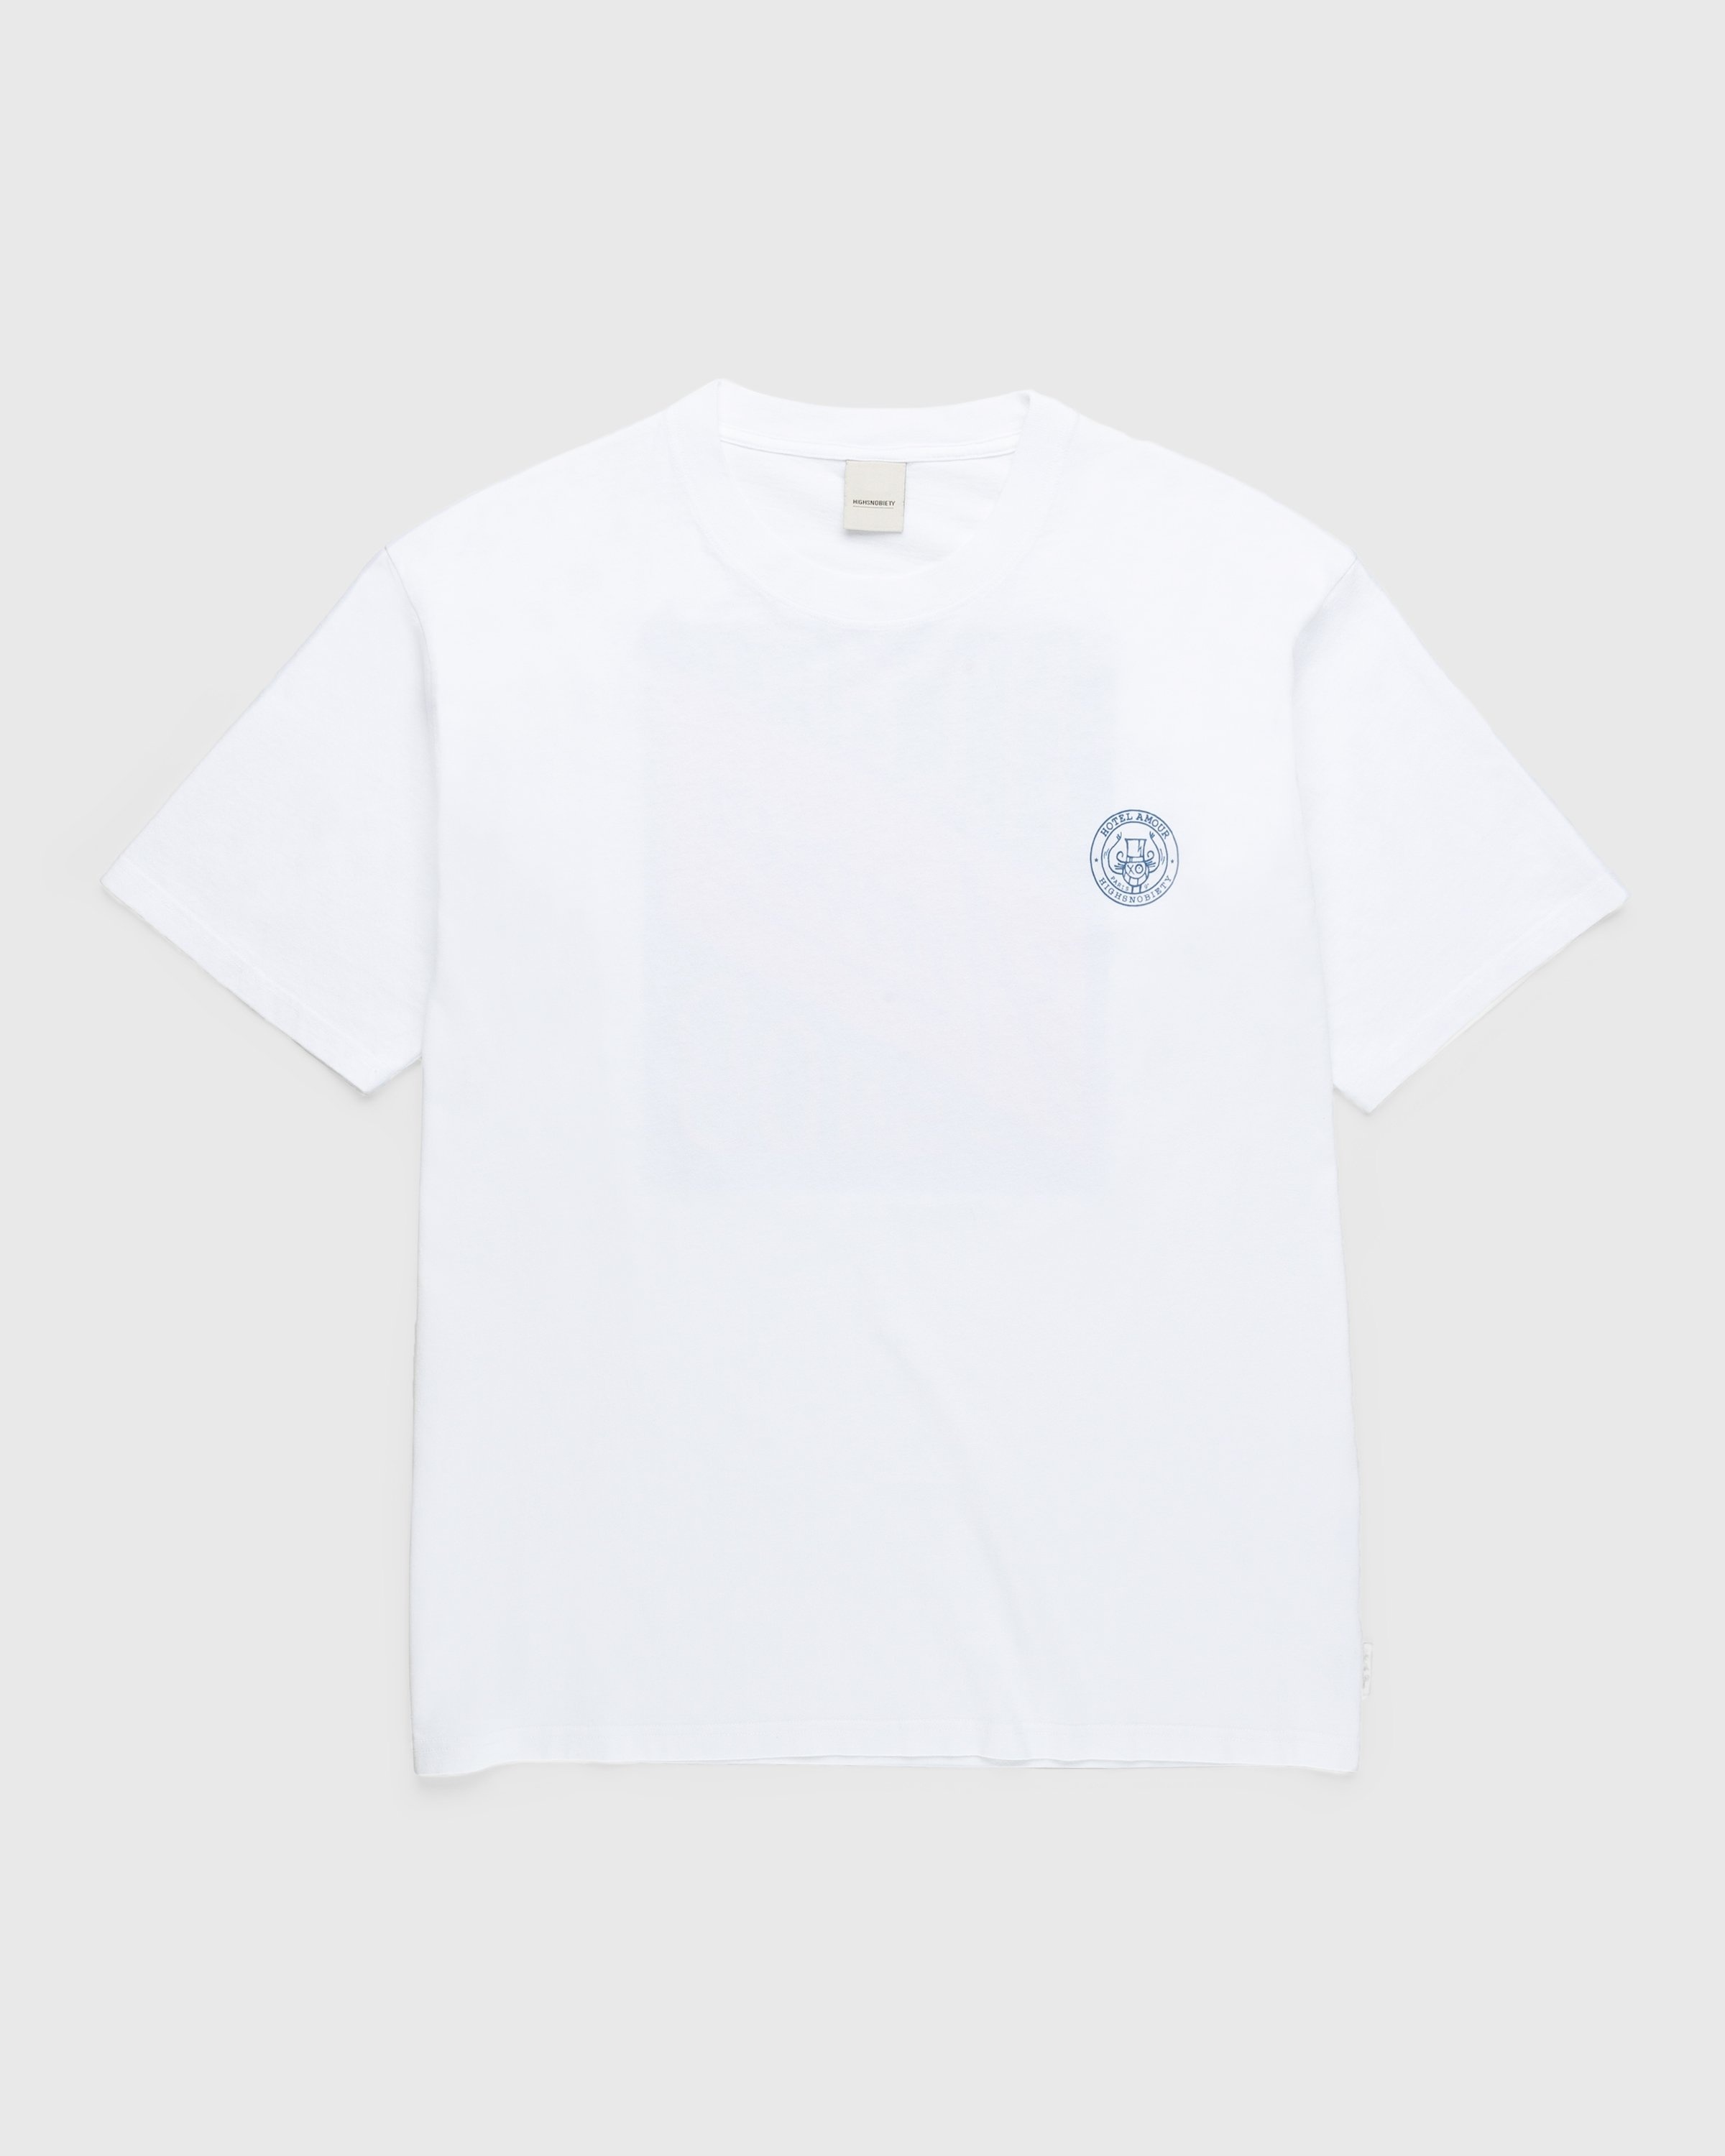 Hotel Amour x Highsnobiety – Not In Paris 4 T-Shirt White - T-shirts - White - Image 2